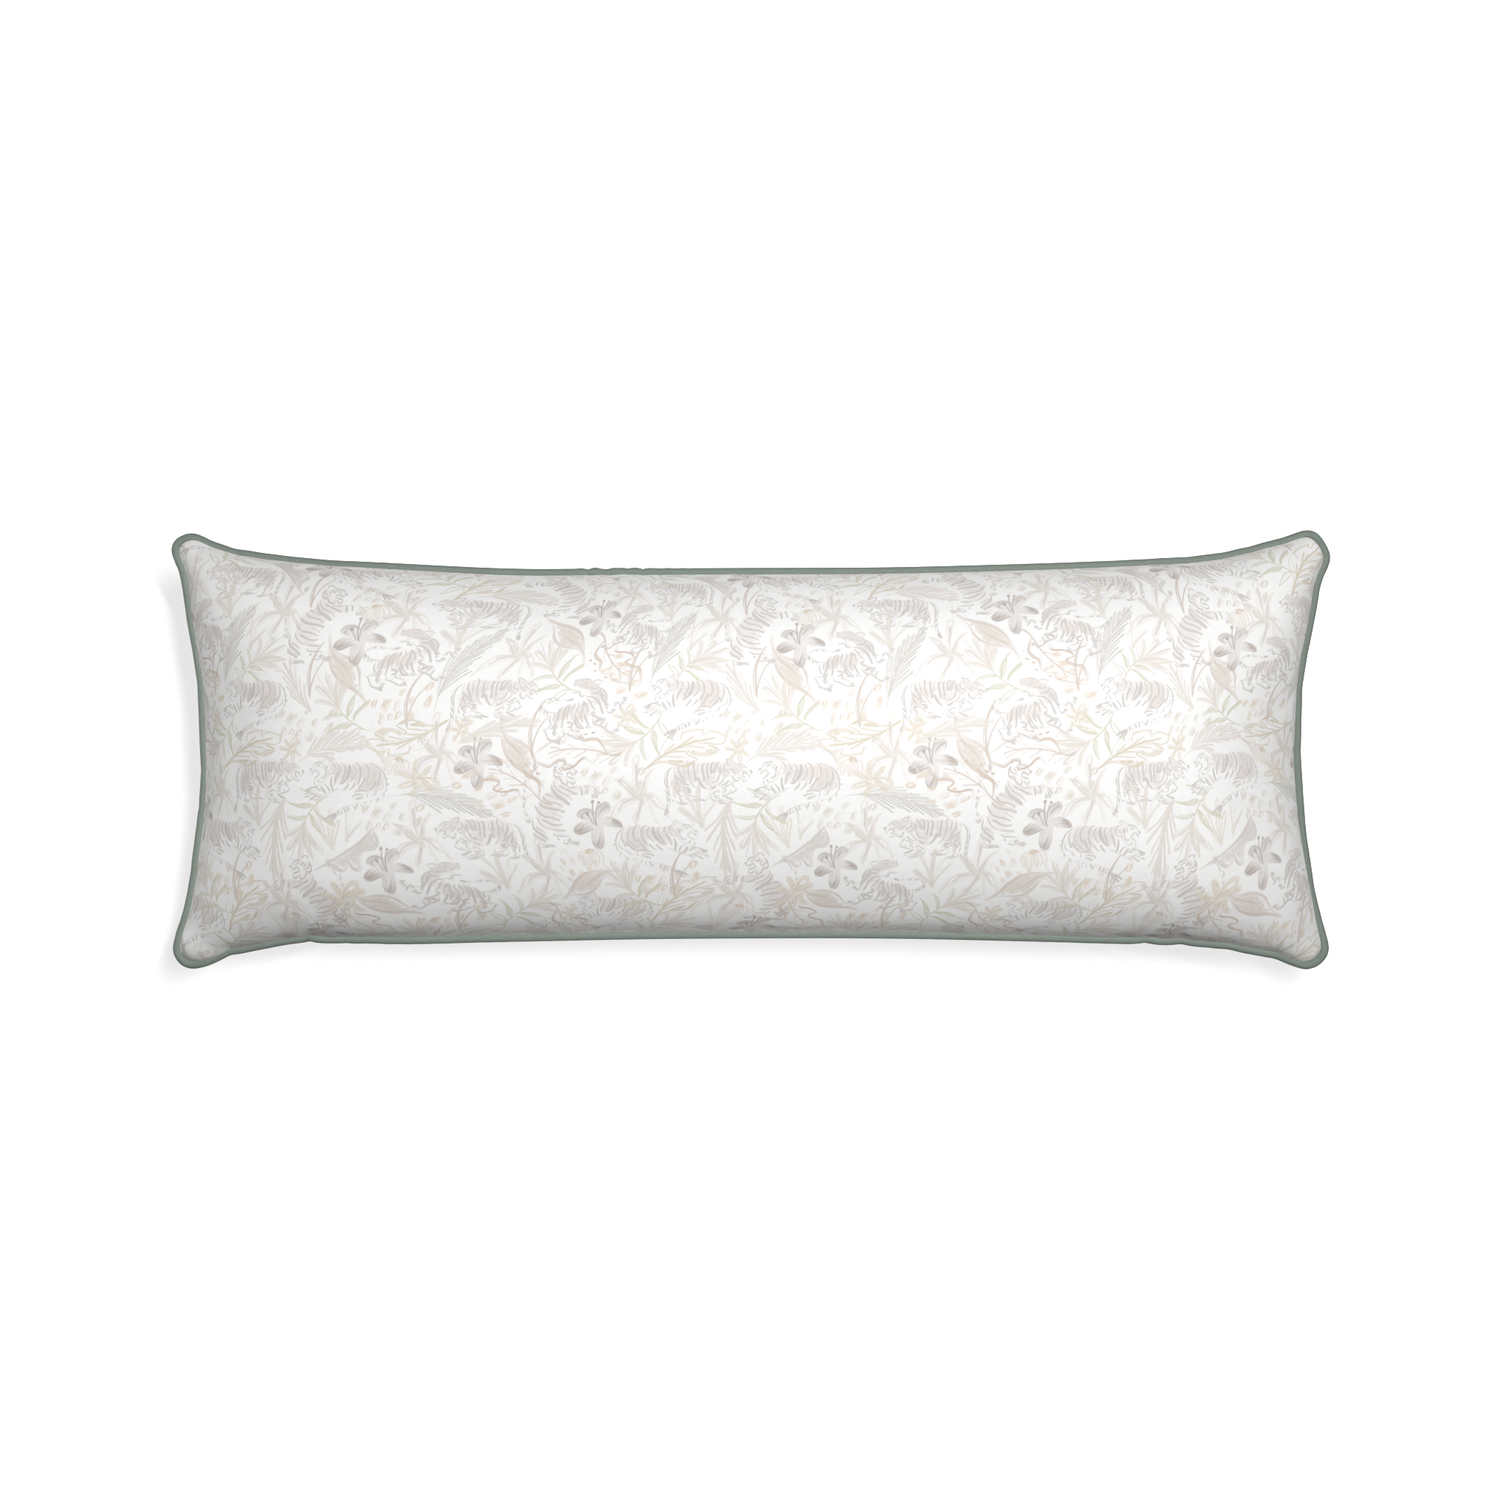 Xl-lumbar frida sand custom beige chinoiserie tigerpillow with sage piping on white background